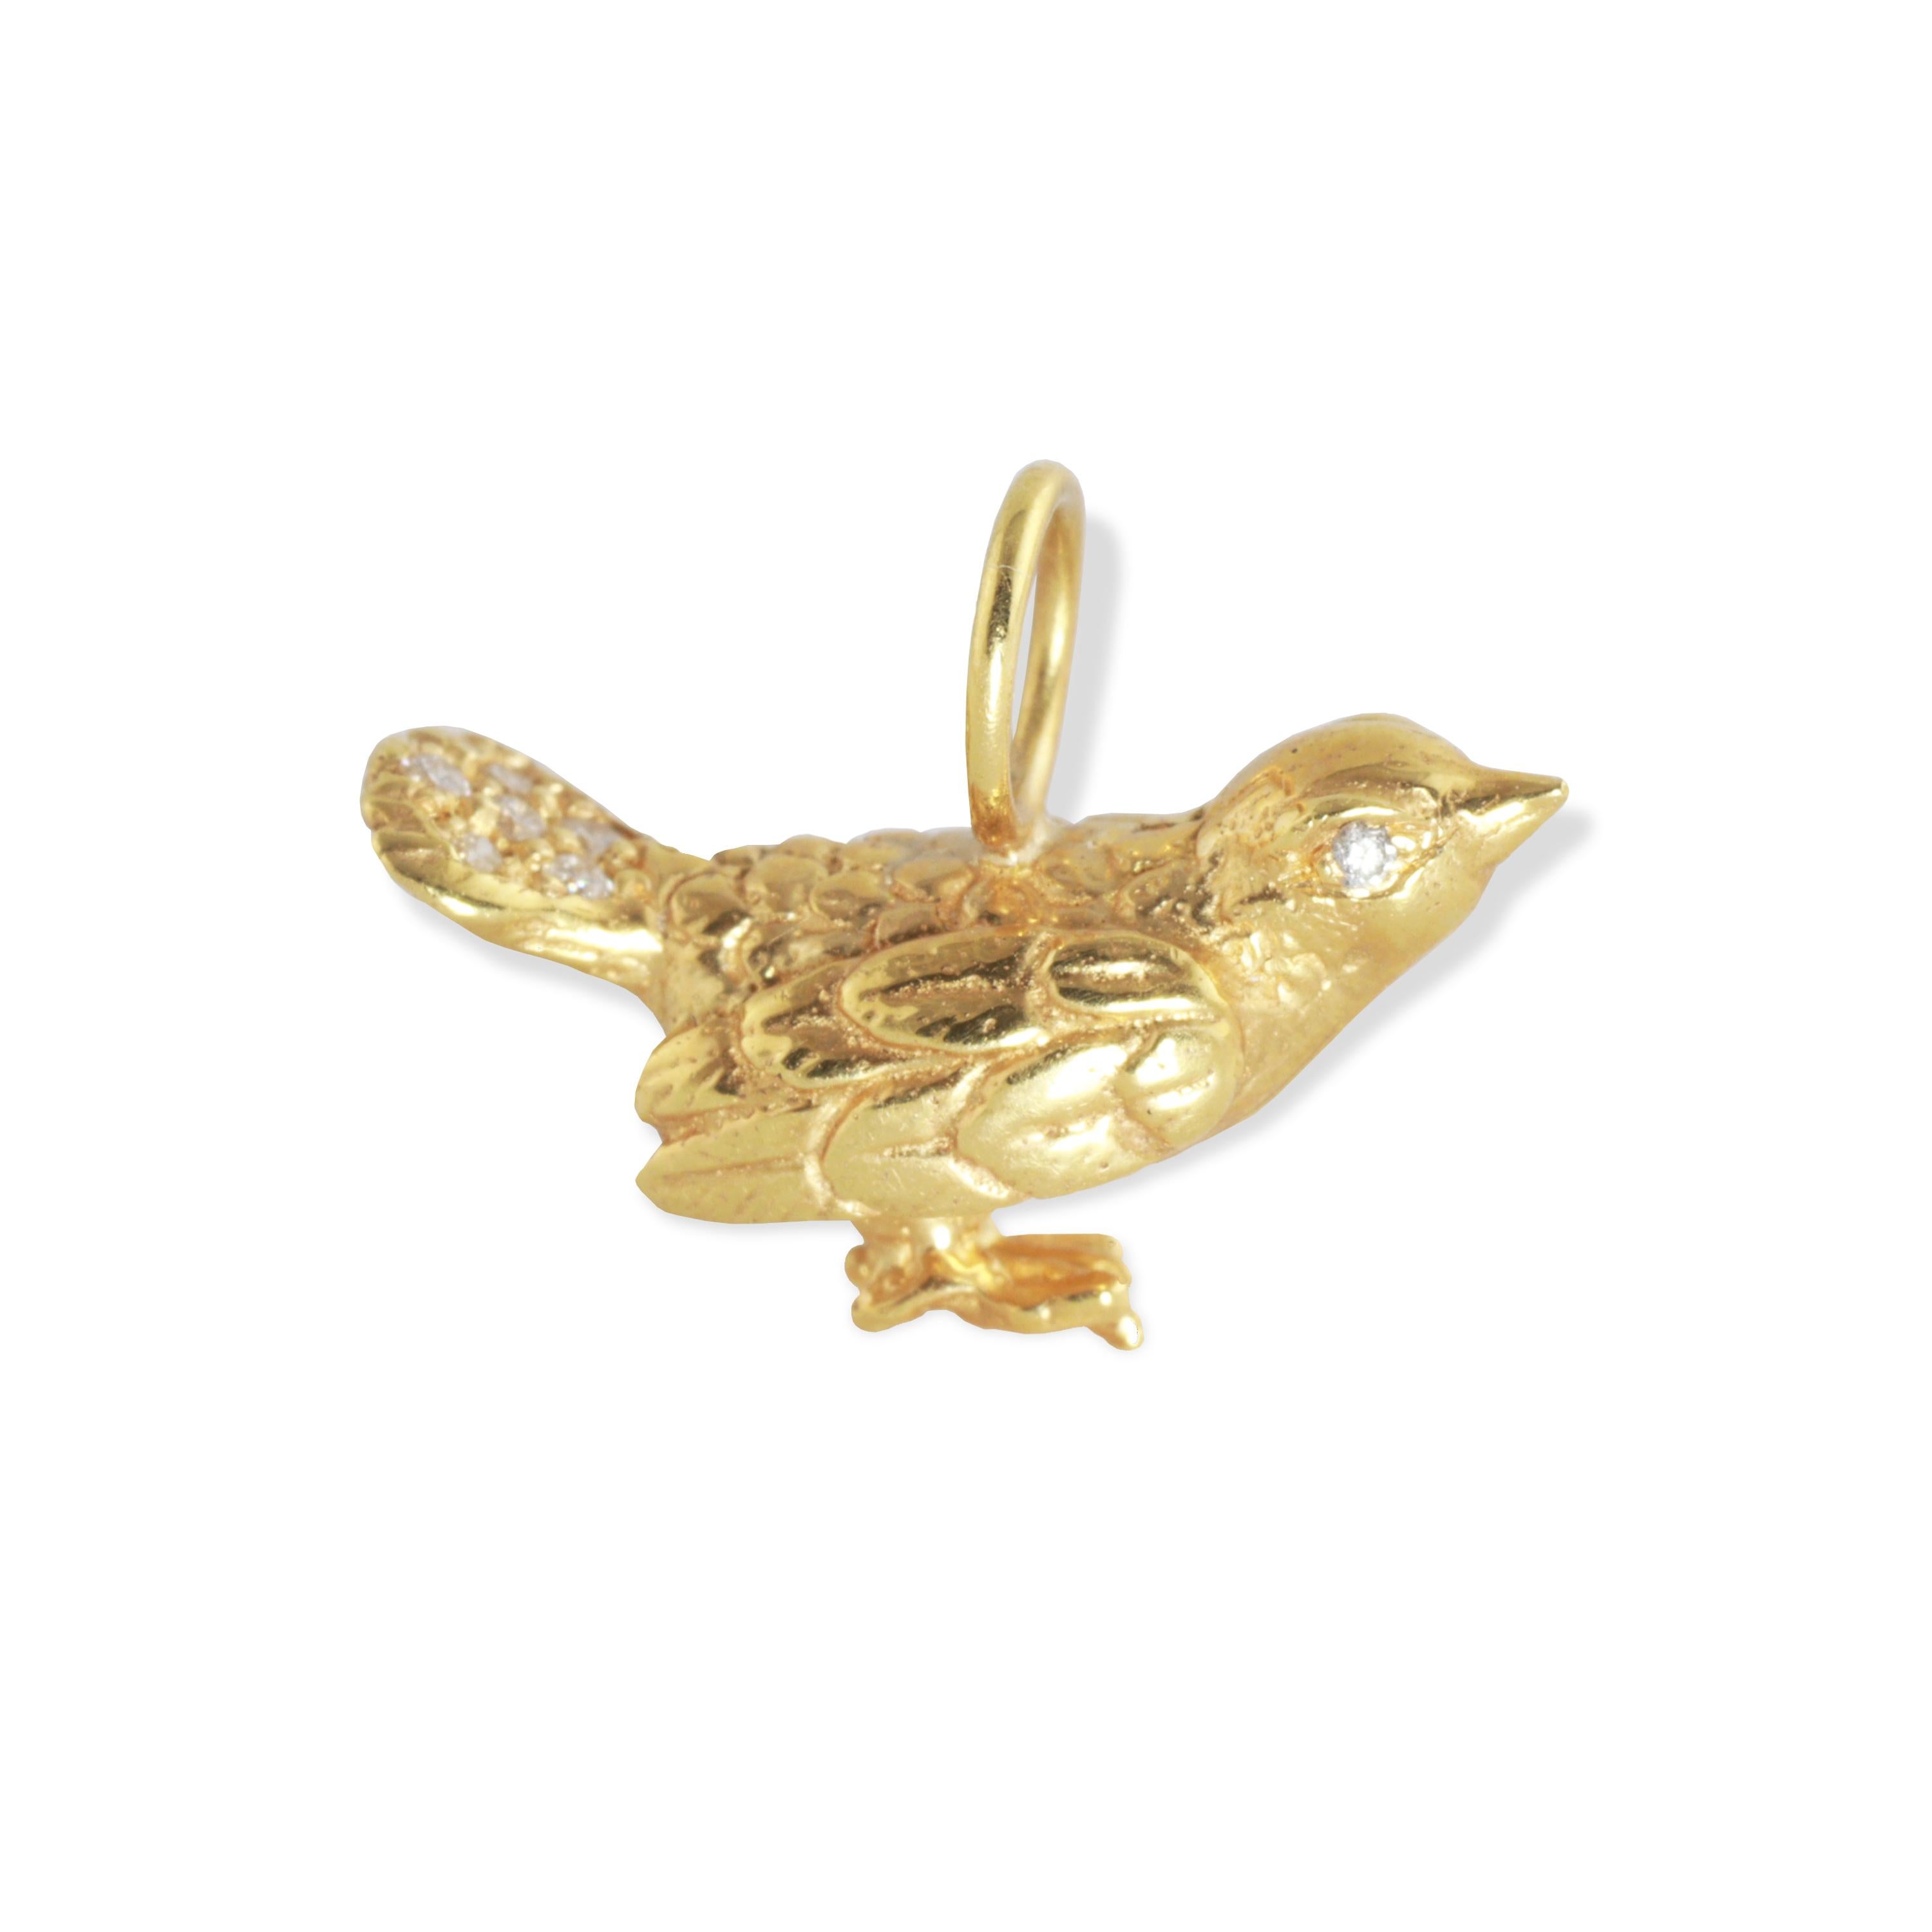 A delicate Bird pendant with .04 carats of diamonds decorating the tail and eyes in 18k yellow gold.
The pendant has tiny feet in which the bird can stand on its own.   The pendant symbolizes peace and transformation and was made in collaboration